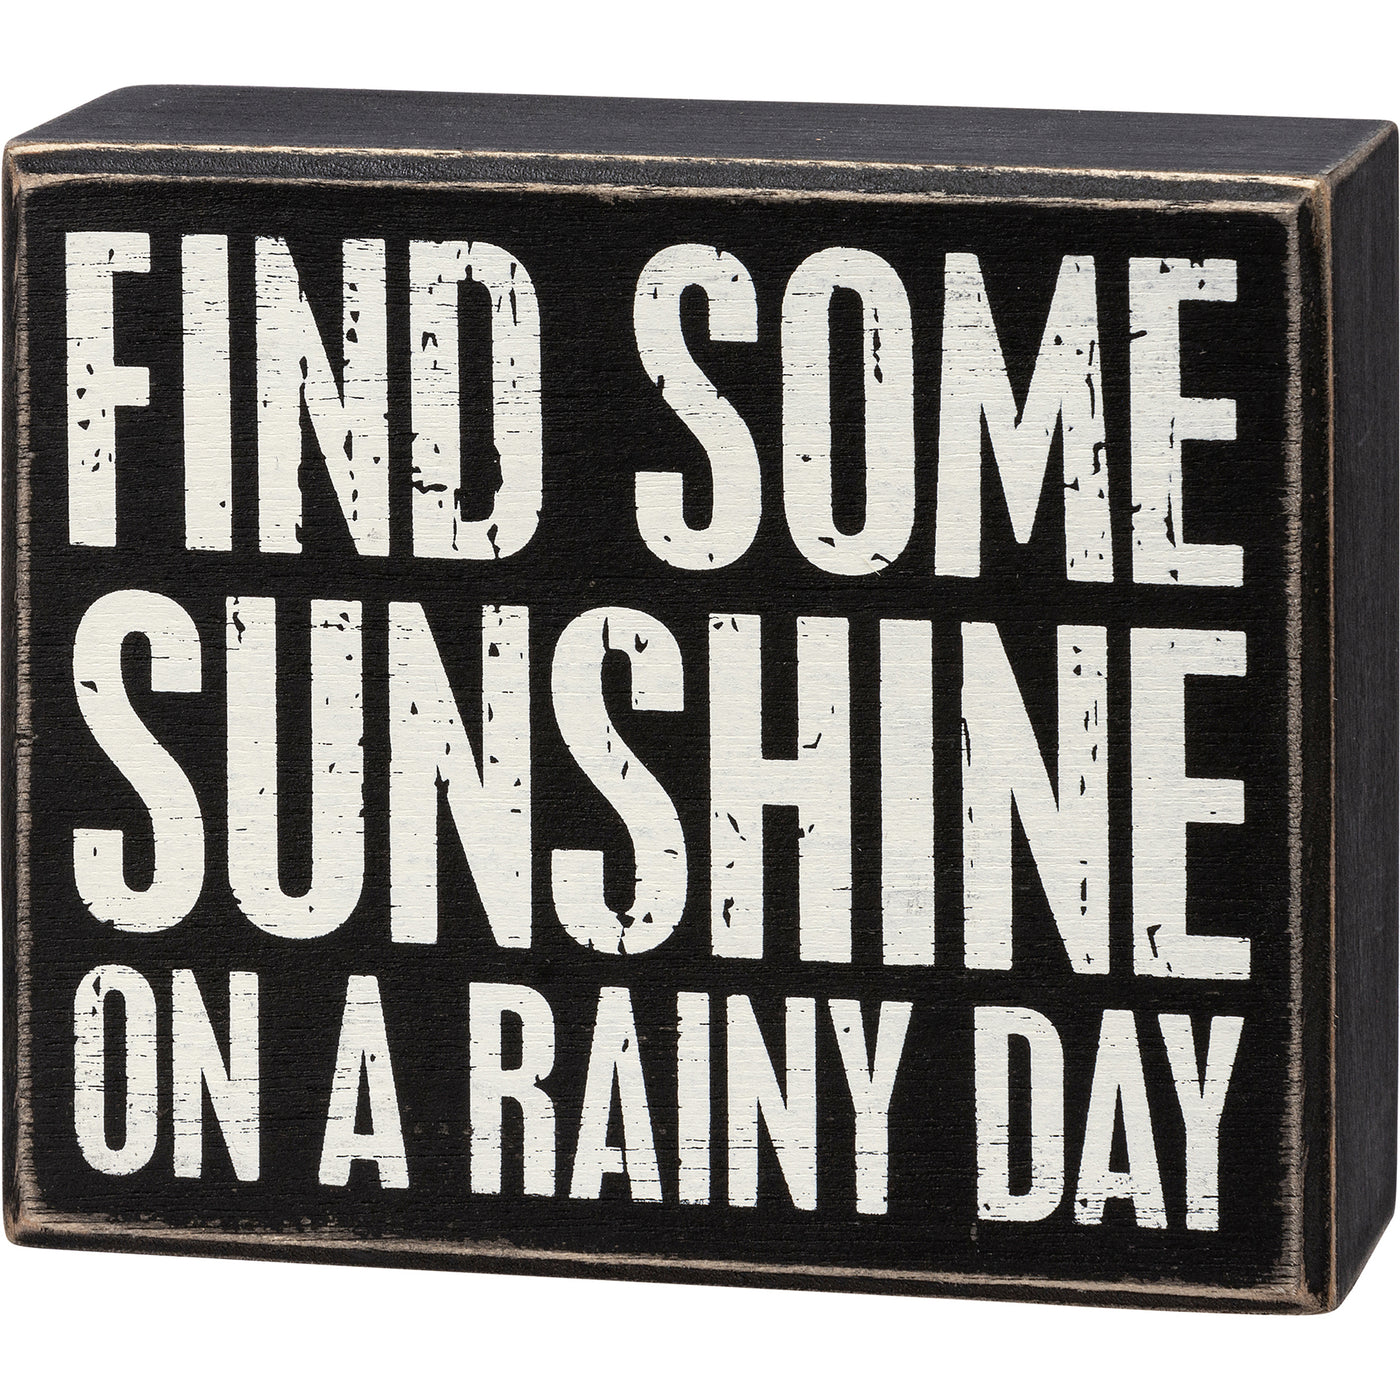 Surprise Me Sale 🤭 Find Some Sunshine On A Rainy Day Small Box Sign